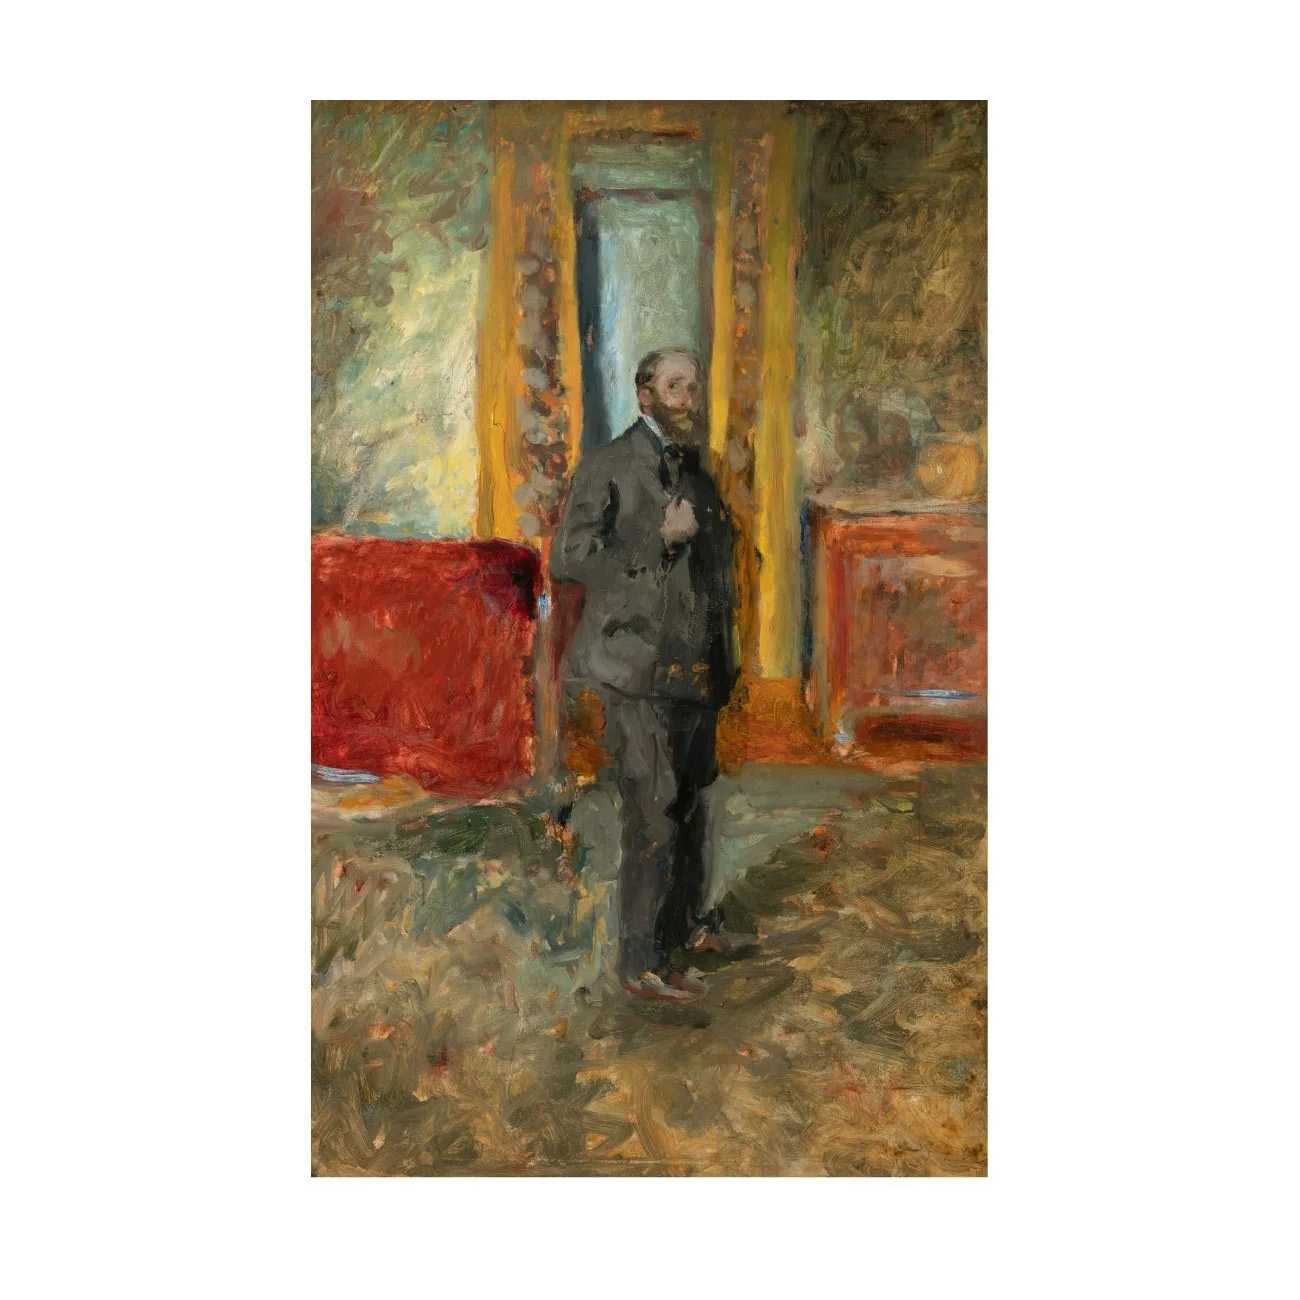 Full-length self-portrait by Édouard Vuillard, estimated at $150,000-$250,000 at Heritage Auctions June 4.